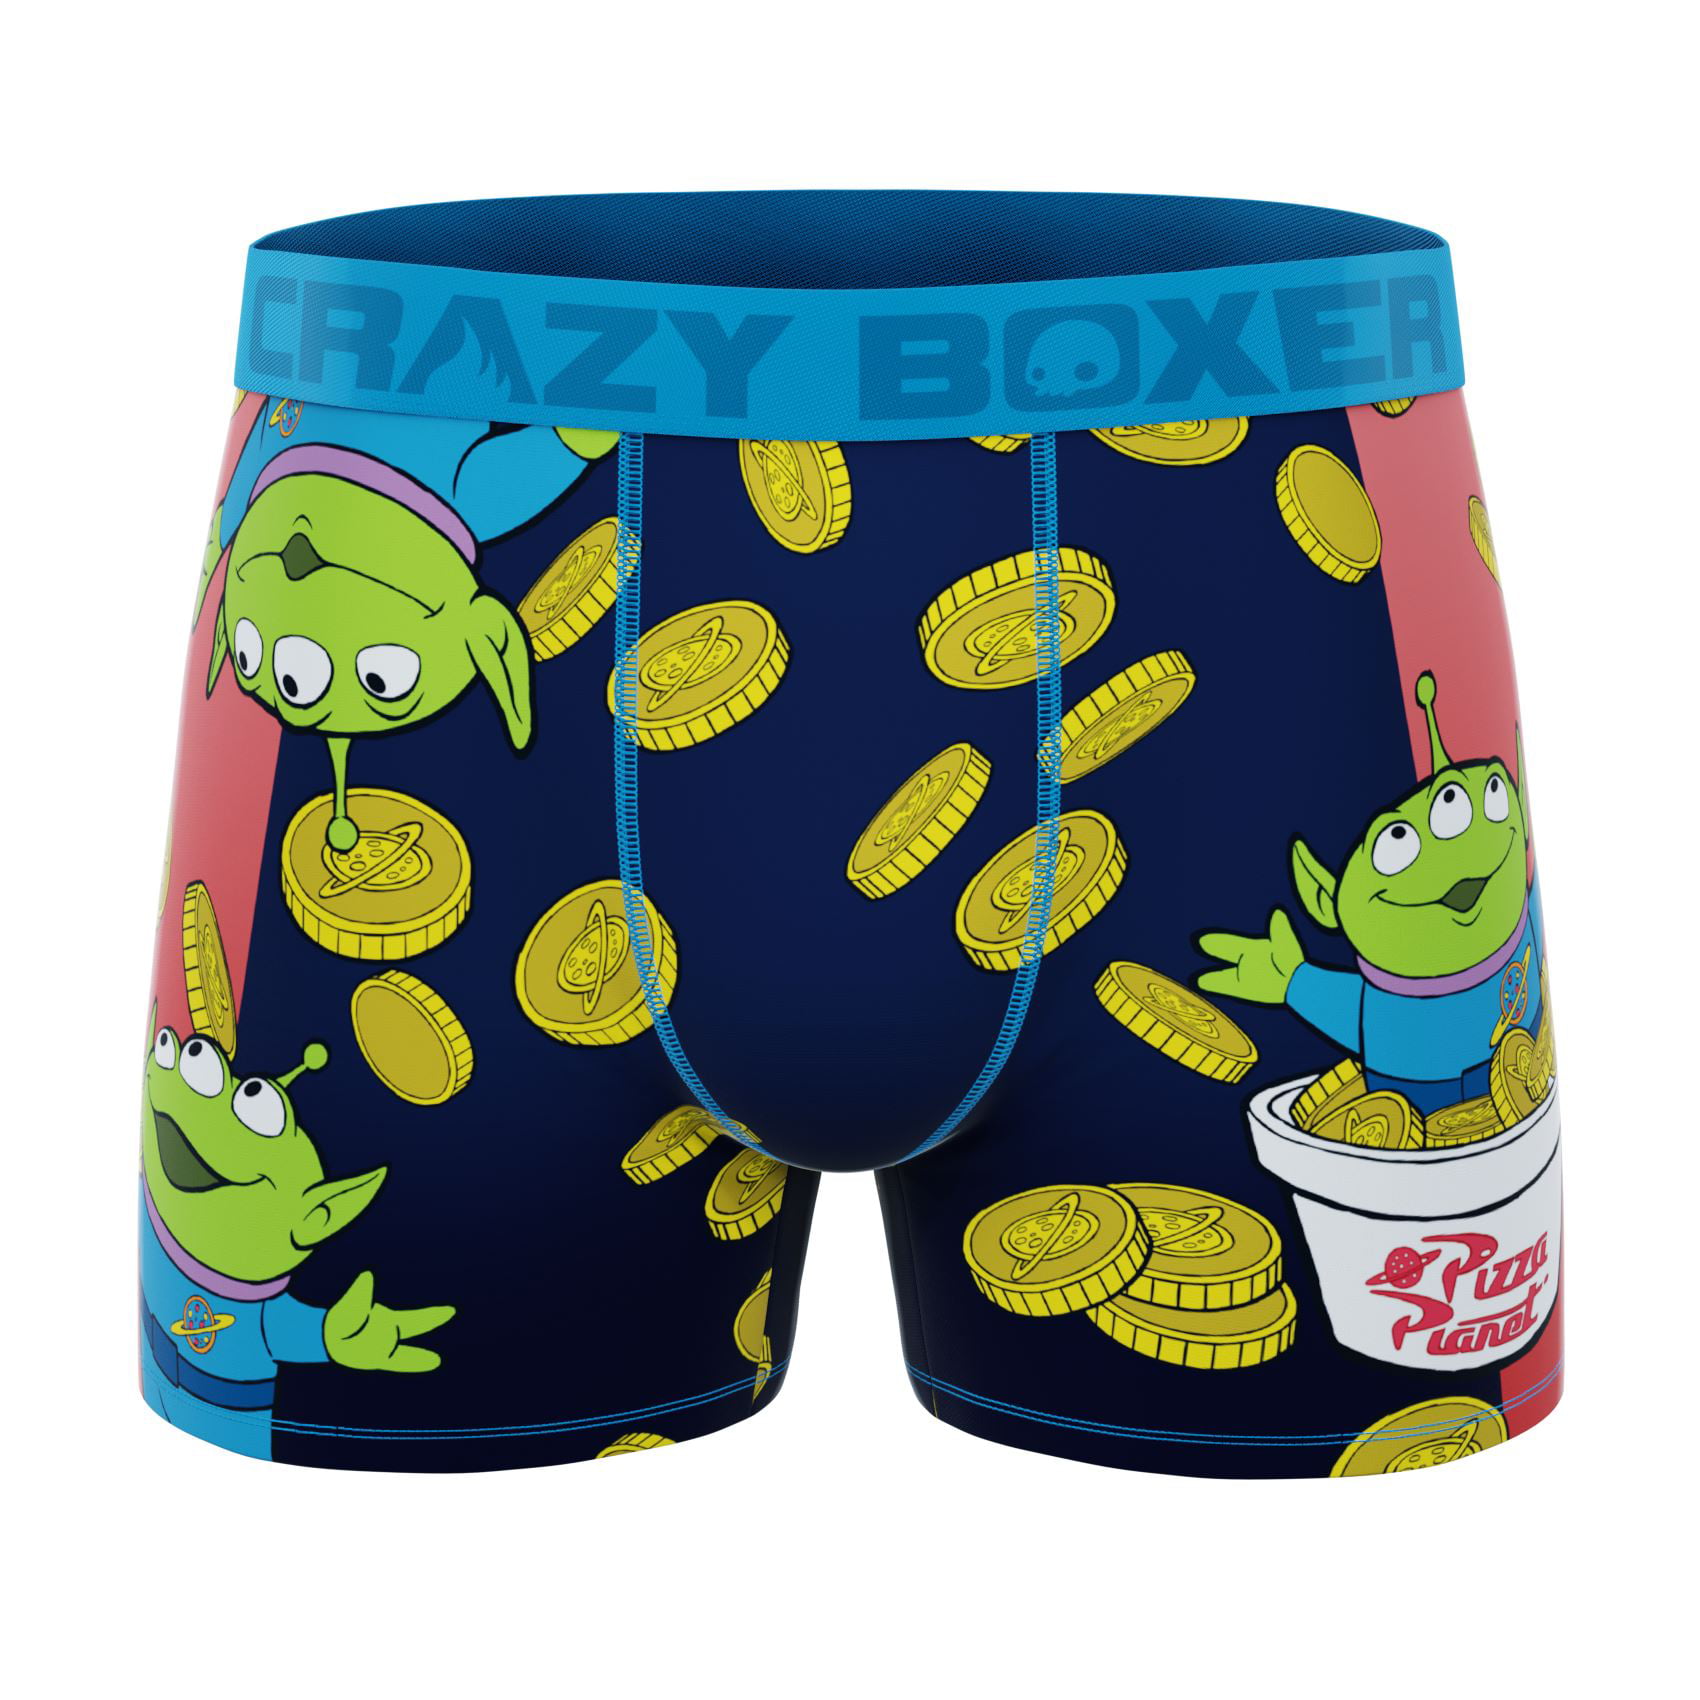 CRAZYBOXER Toy Story Characters 3-Pack Adult Mens Boxer Briefs